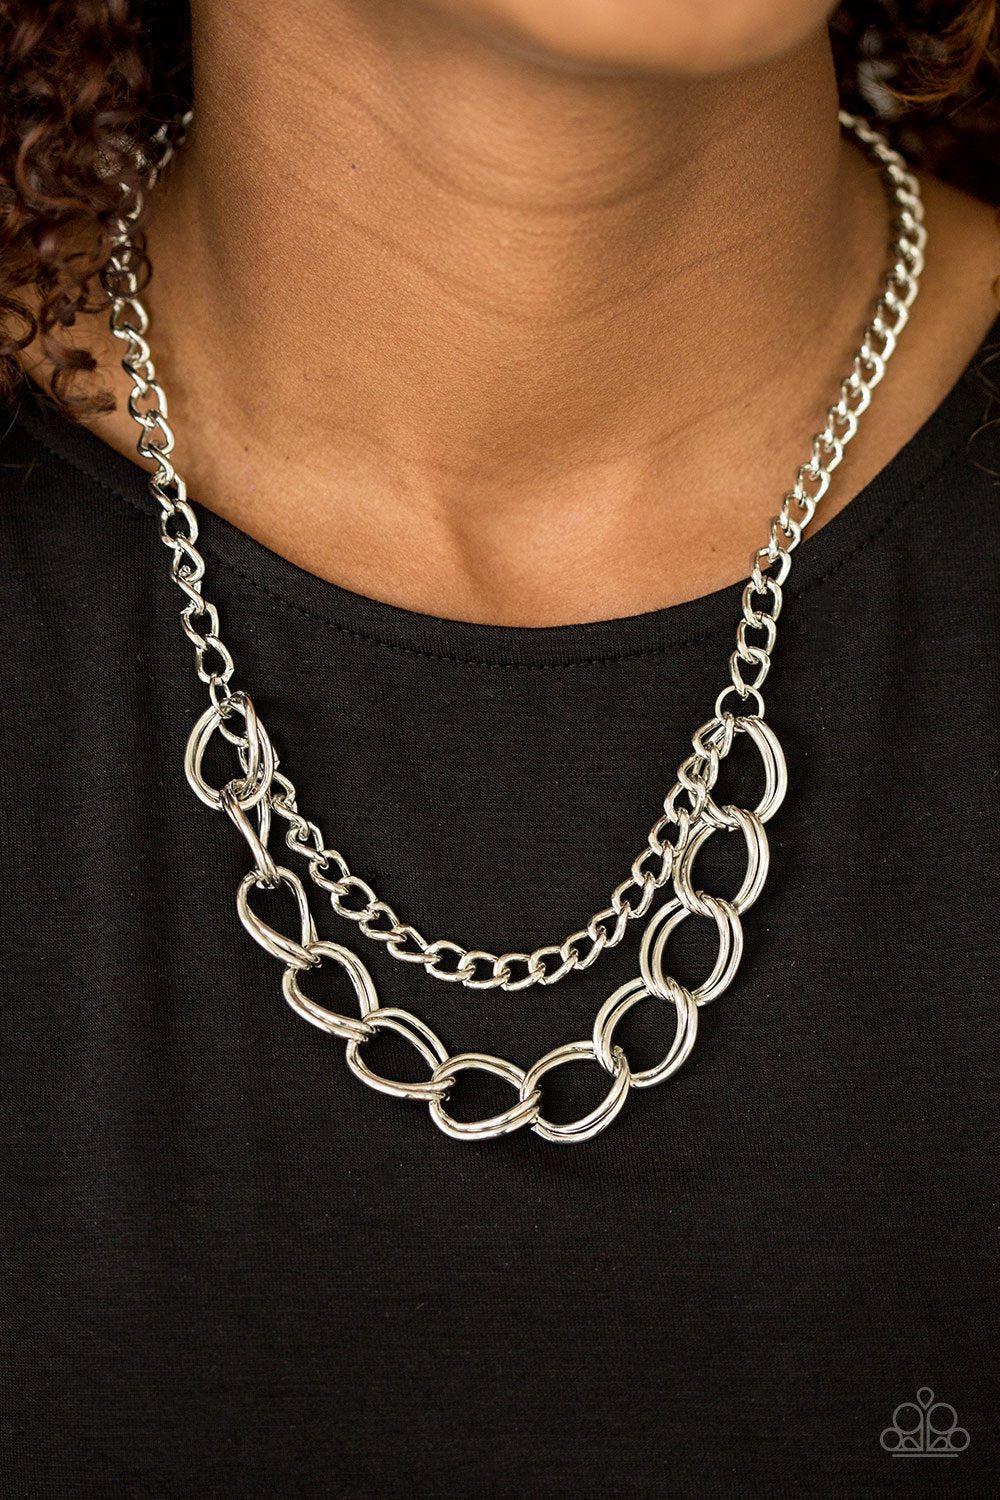 Top Boss Silver Chain Necklace - Paparazzi Accessories-CarasShop.com - $5 Jewelry by Cara Jewels